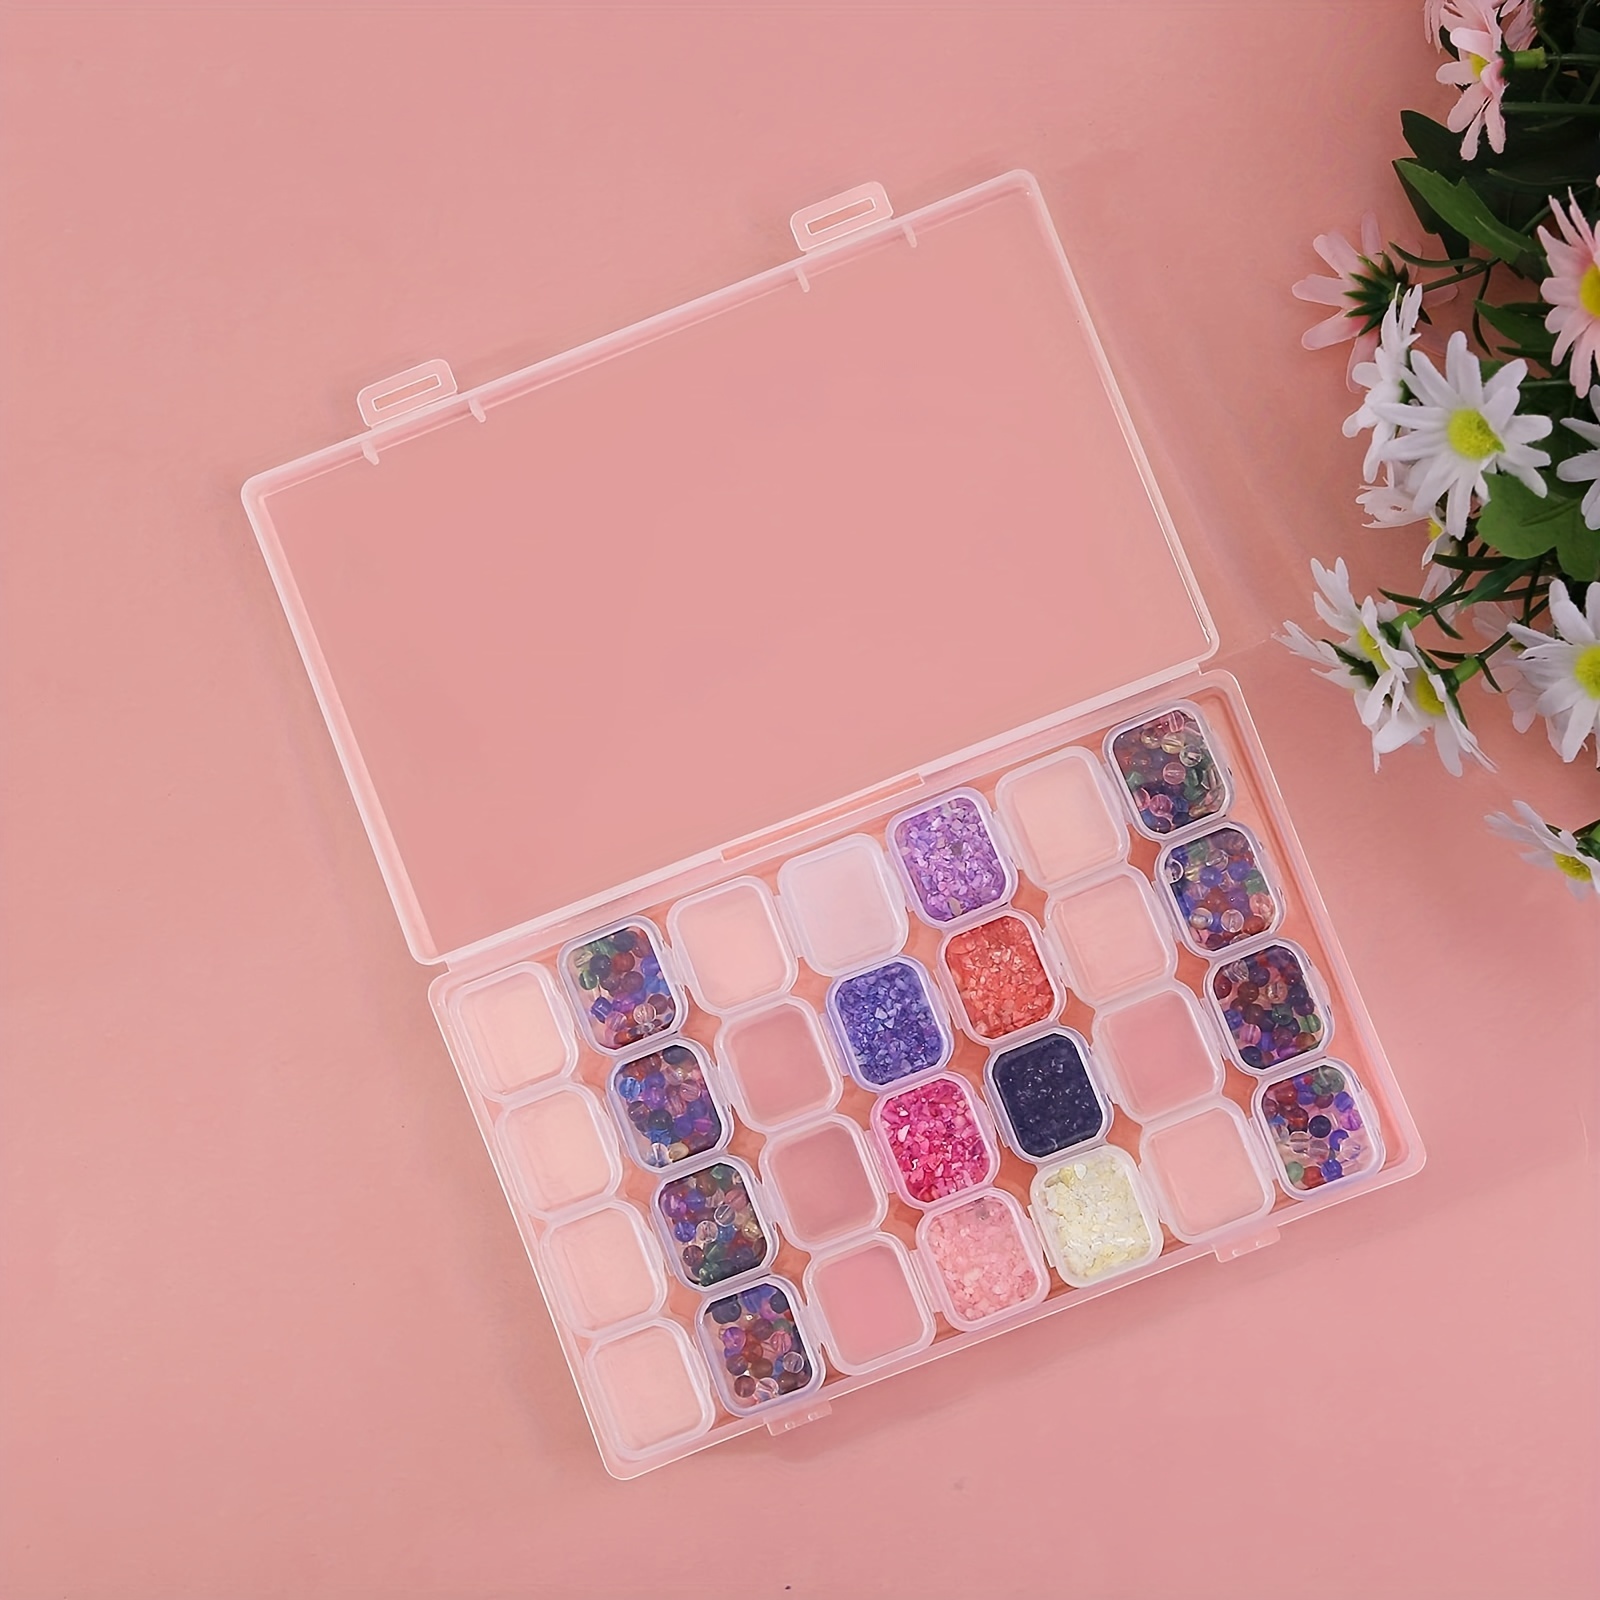 1 Piece 28/56 Grid Clear Diamond Painting Storage Container For Bead Storage,  Sewing, Nail Diamonds, Embroidery Box Storage Box, Storage Box For Nails  Diamonds And Beads, Suitable For DIY Art Craft Art